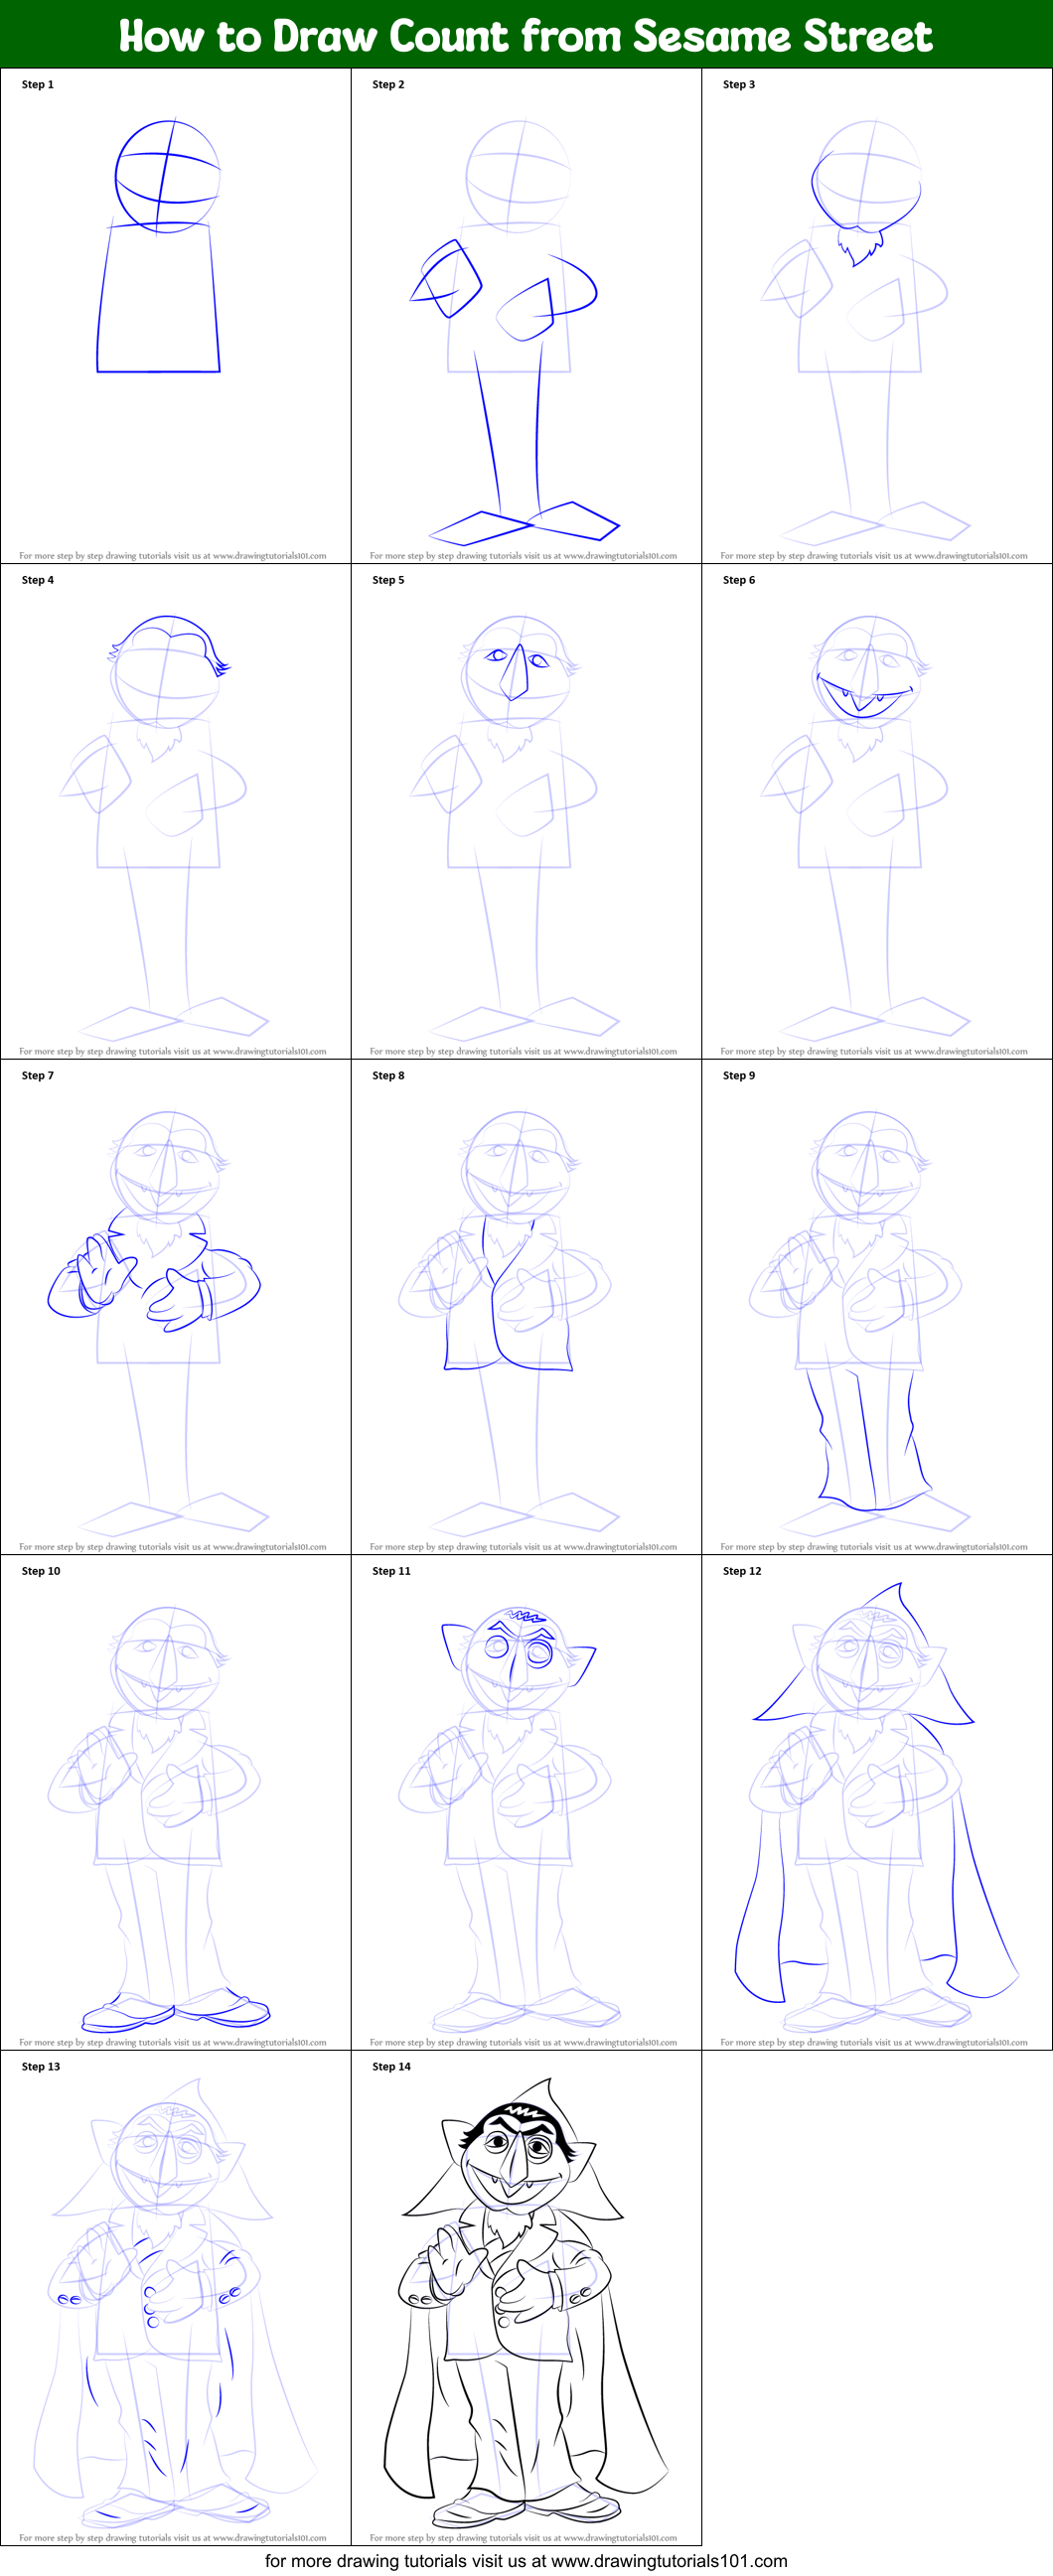 How to Draw Count from Sesame Street printable step by step drawing